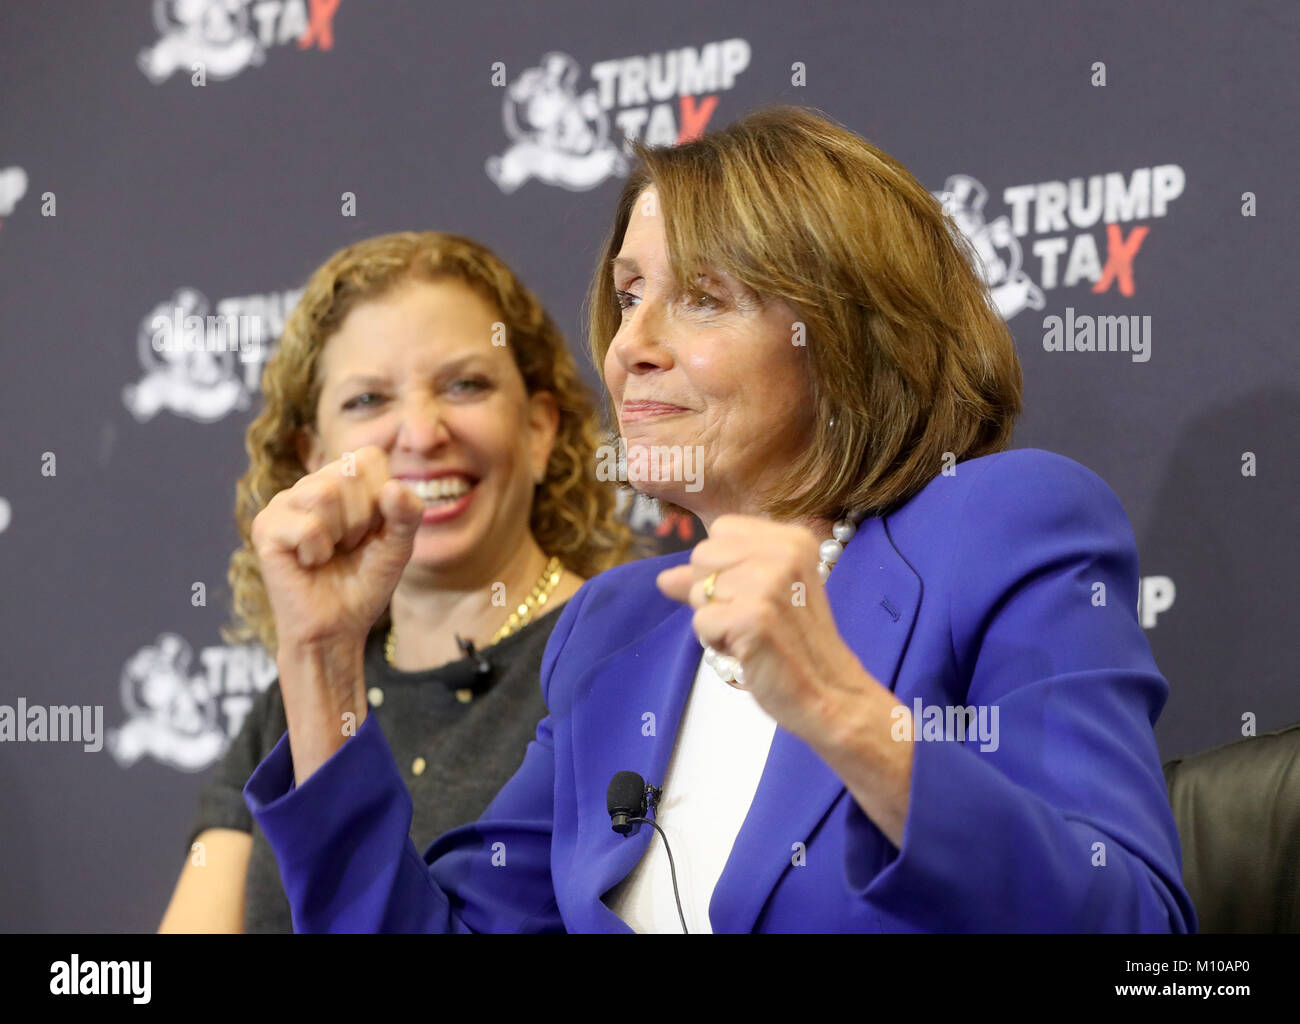 Boca Raton, FL, USA. 26th Jan, 2018. U.S. Rep. Debbie Wasserman Schultz and House Democratic leader Nancy Pelosi speak during a town hall meeting Thursday hosted by the Florida Atlantic University College Democrat and discuss the new tax law signed by President Donald Trump. Mike Stocker, South Florida Sun-Sentinel Credit: Sun-Sentinel/ZUMA Wire/Alamy Live News Stock Photo